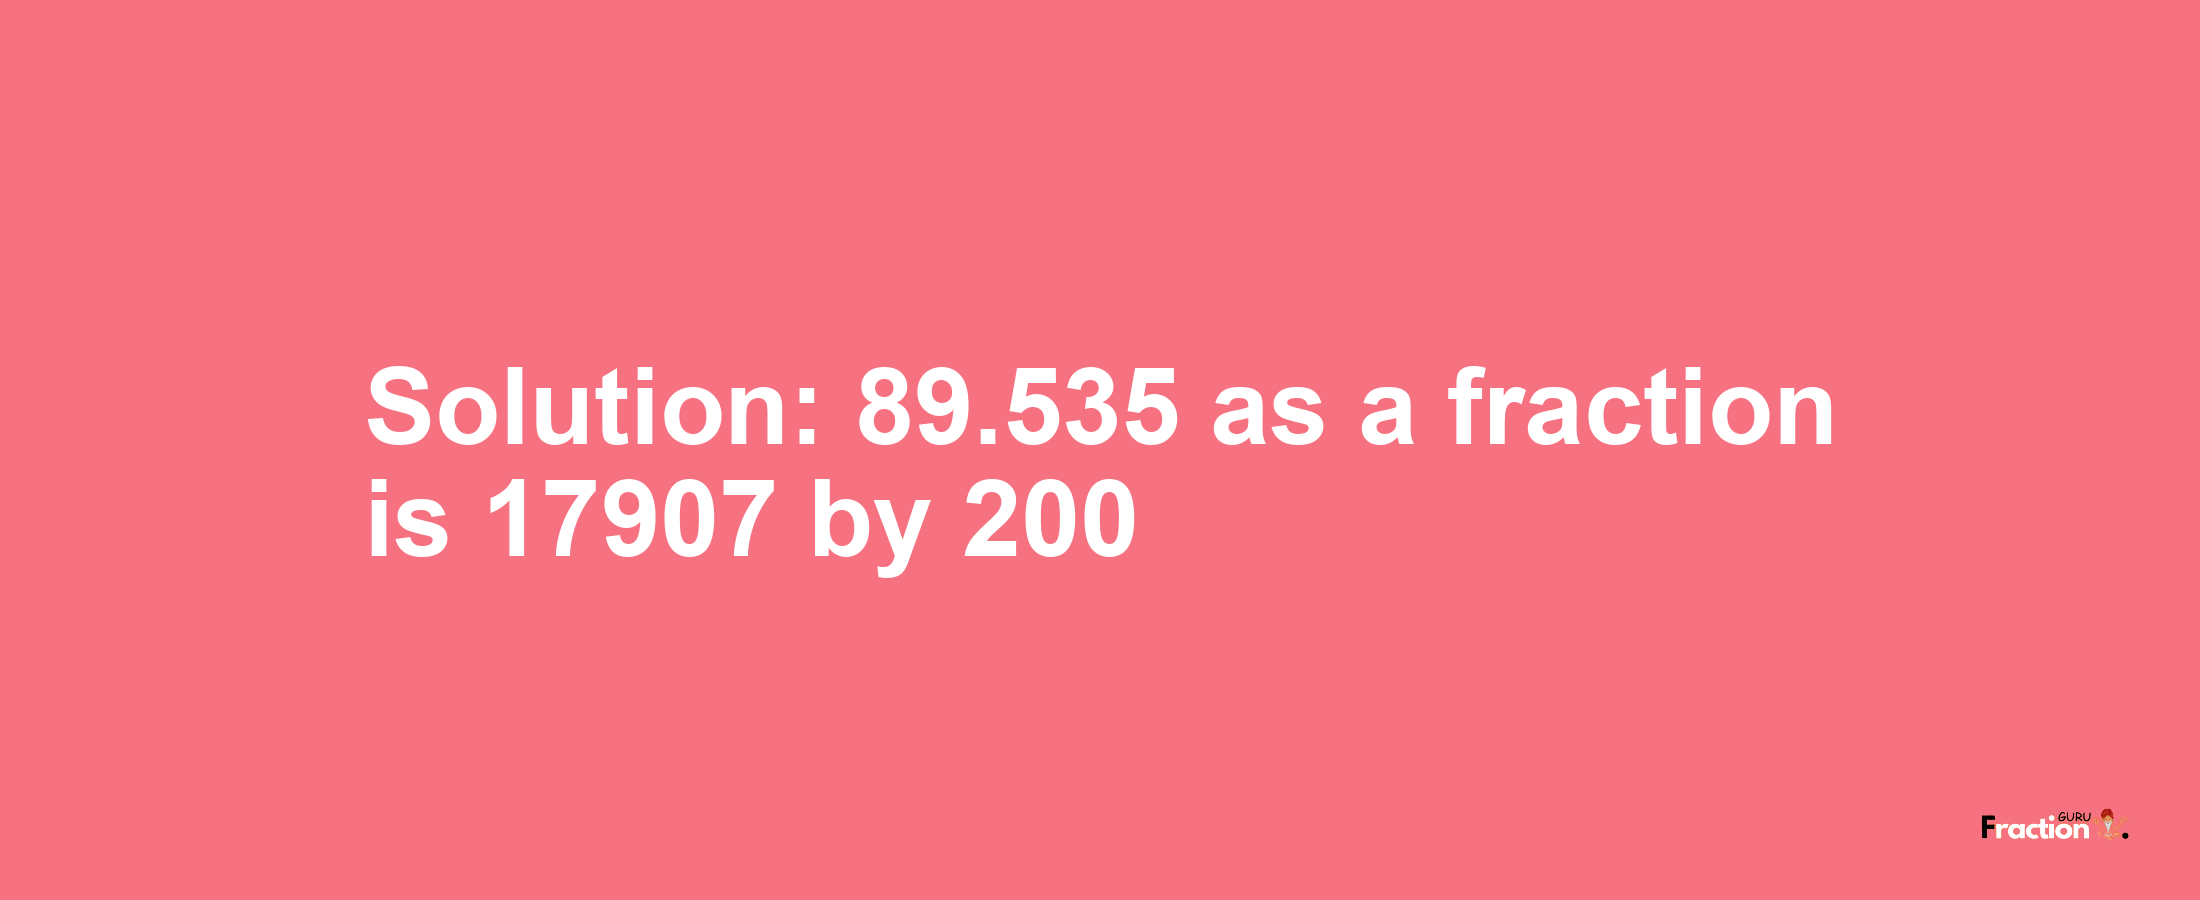 Solution:89.535 as a fraction is 17907/200